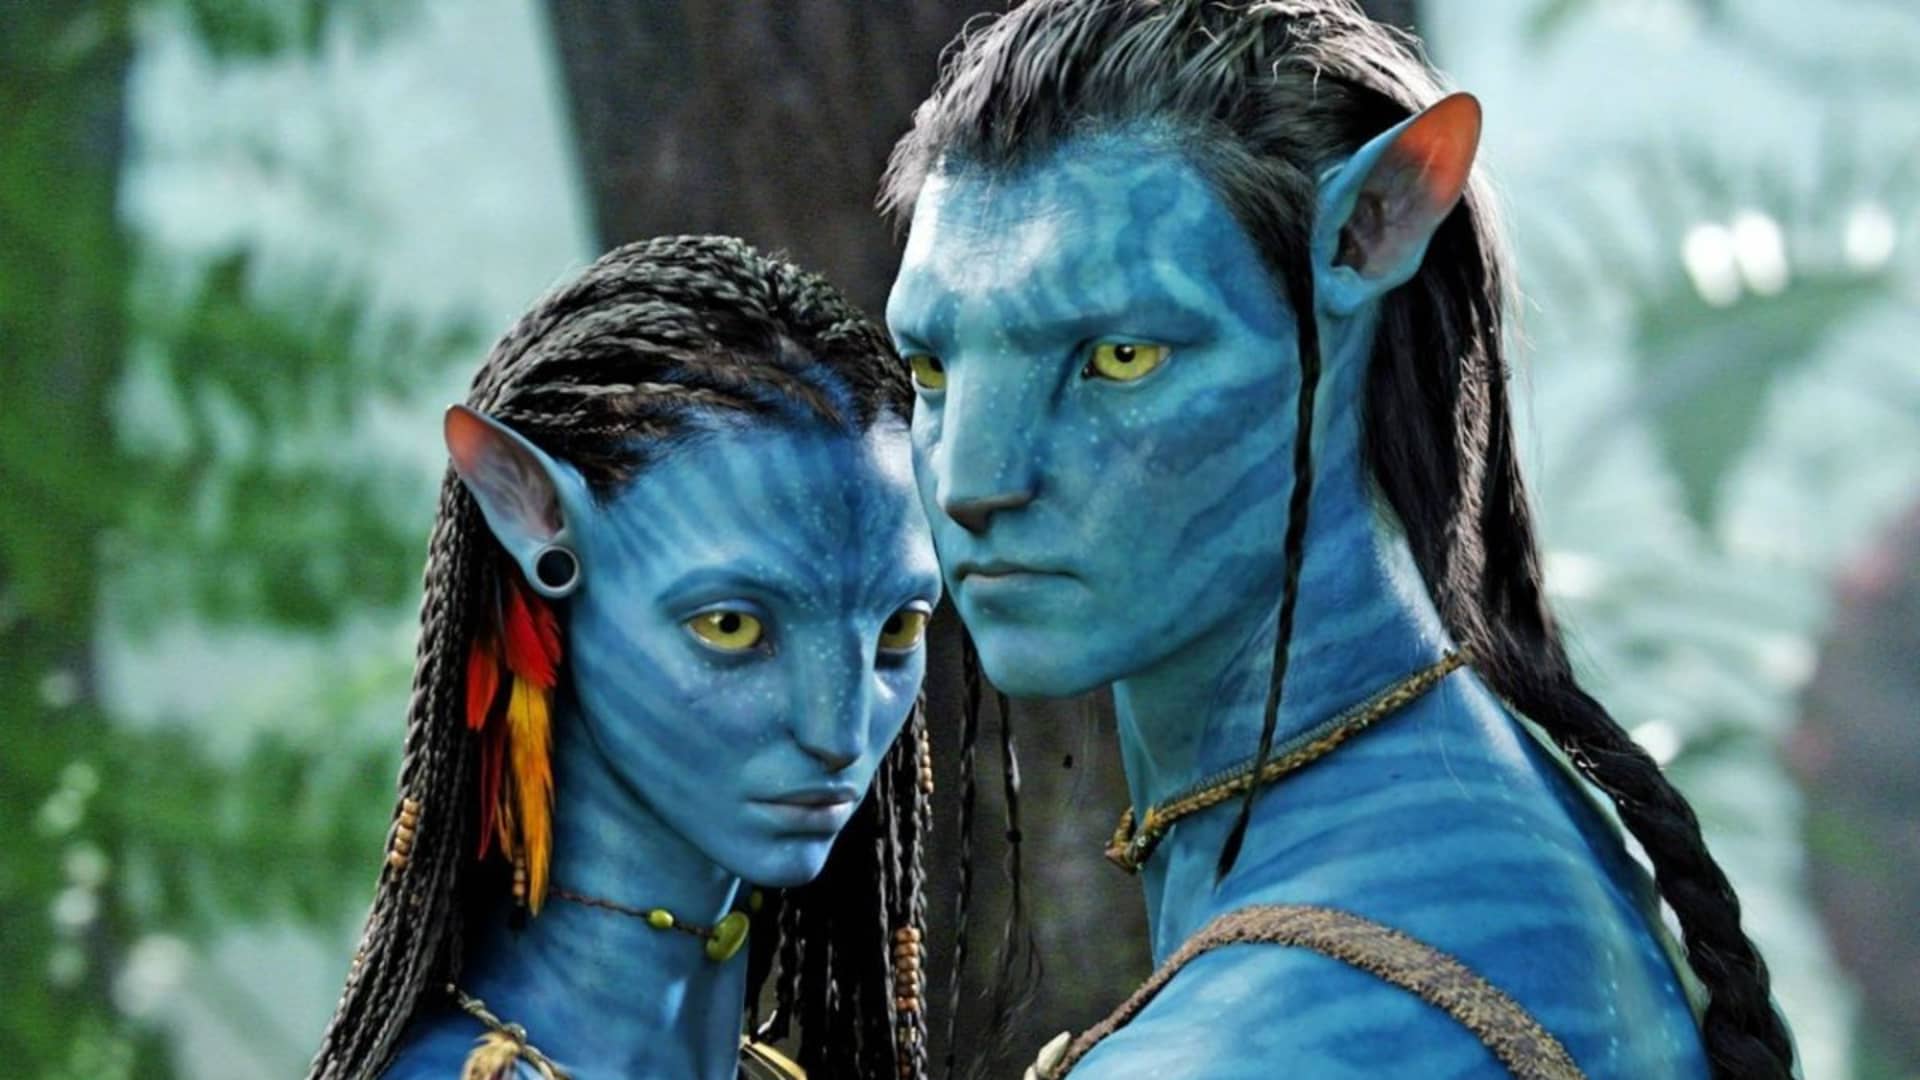 ‘Avatar’ returns to theaters as Disney tries to hype audiences for its long-delayed sequel